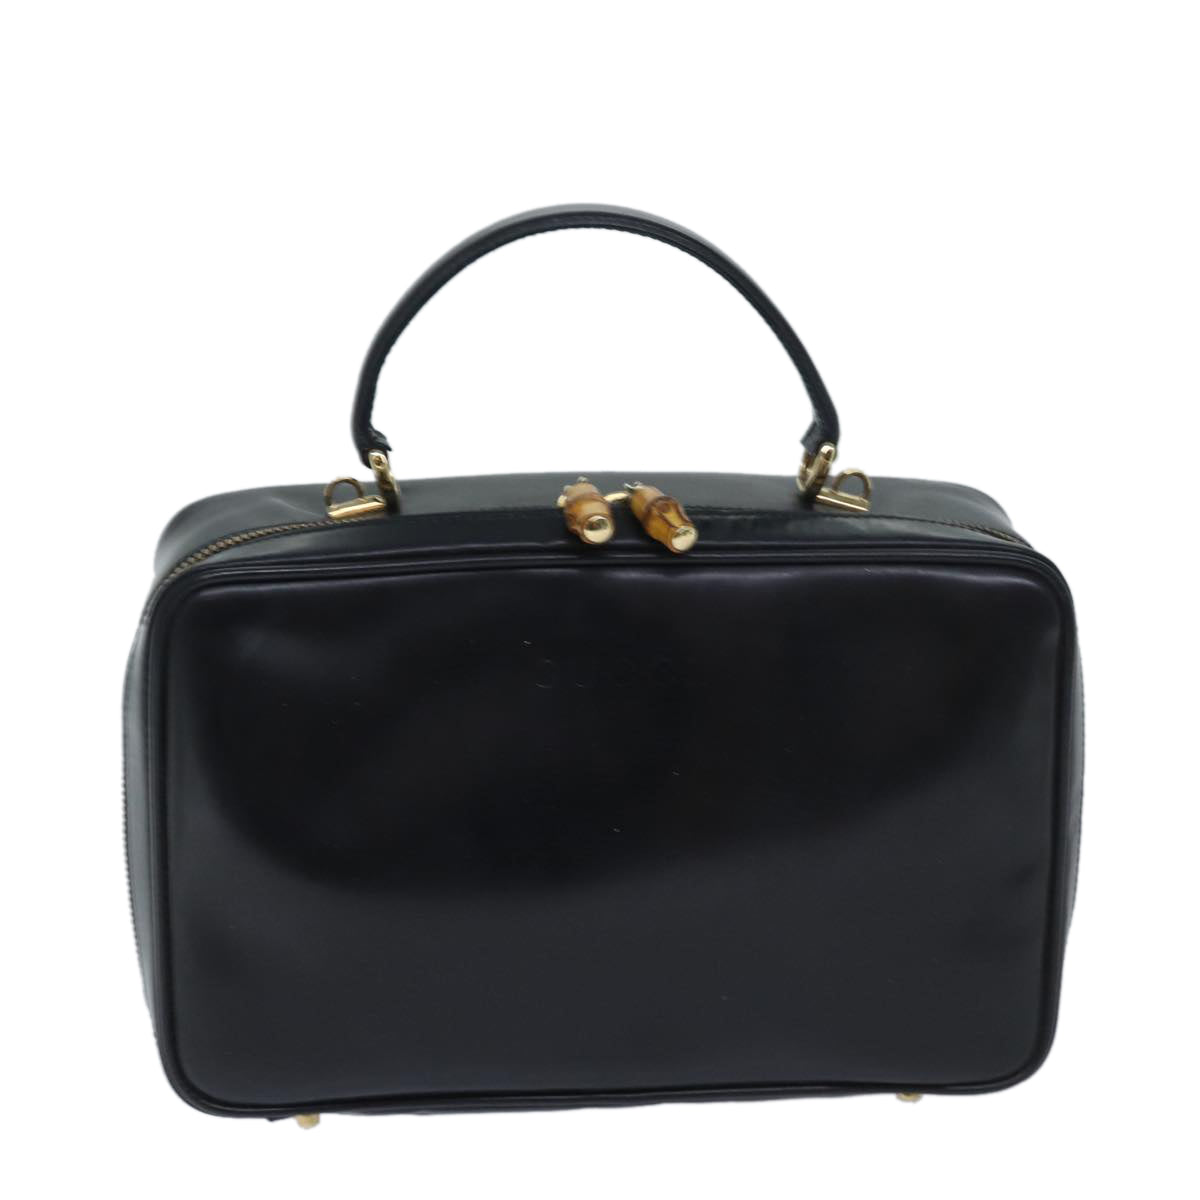 GUCCI Hand Bag Patent leather Black Auth 69778